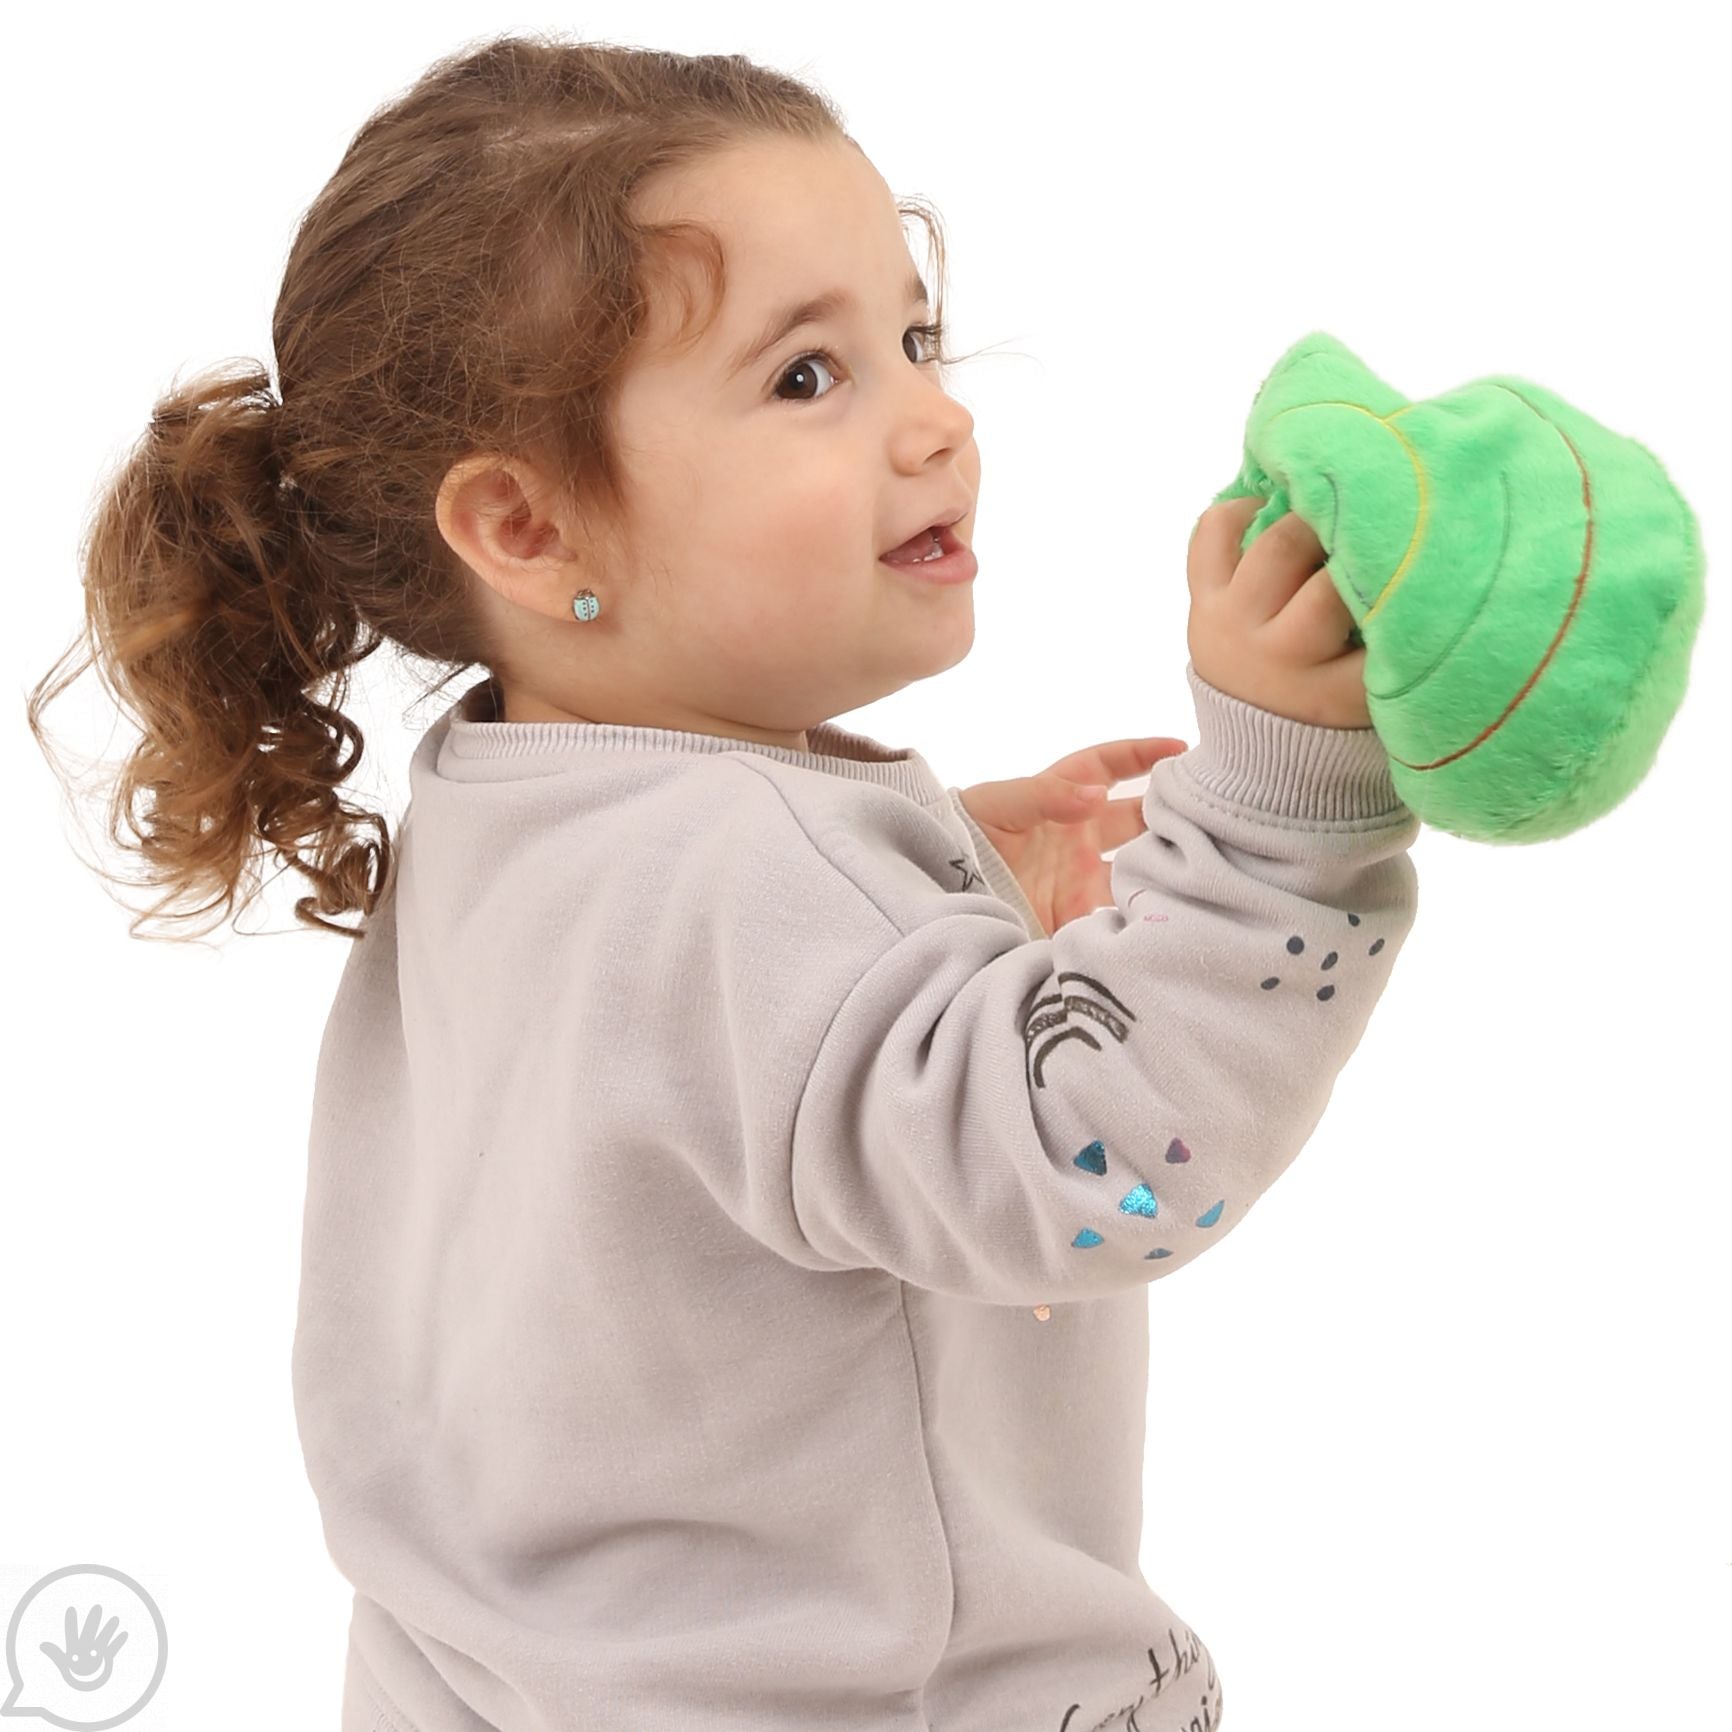 A very small child with light skin tone and a curly brown ponytail holds up the Round Marble Maze.